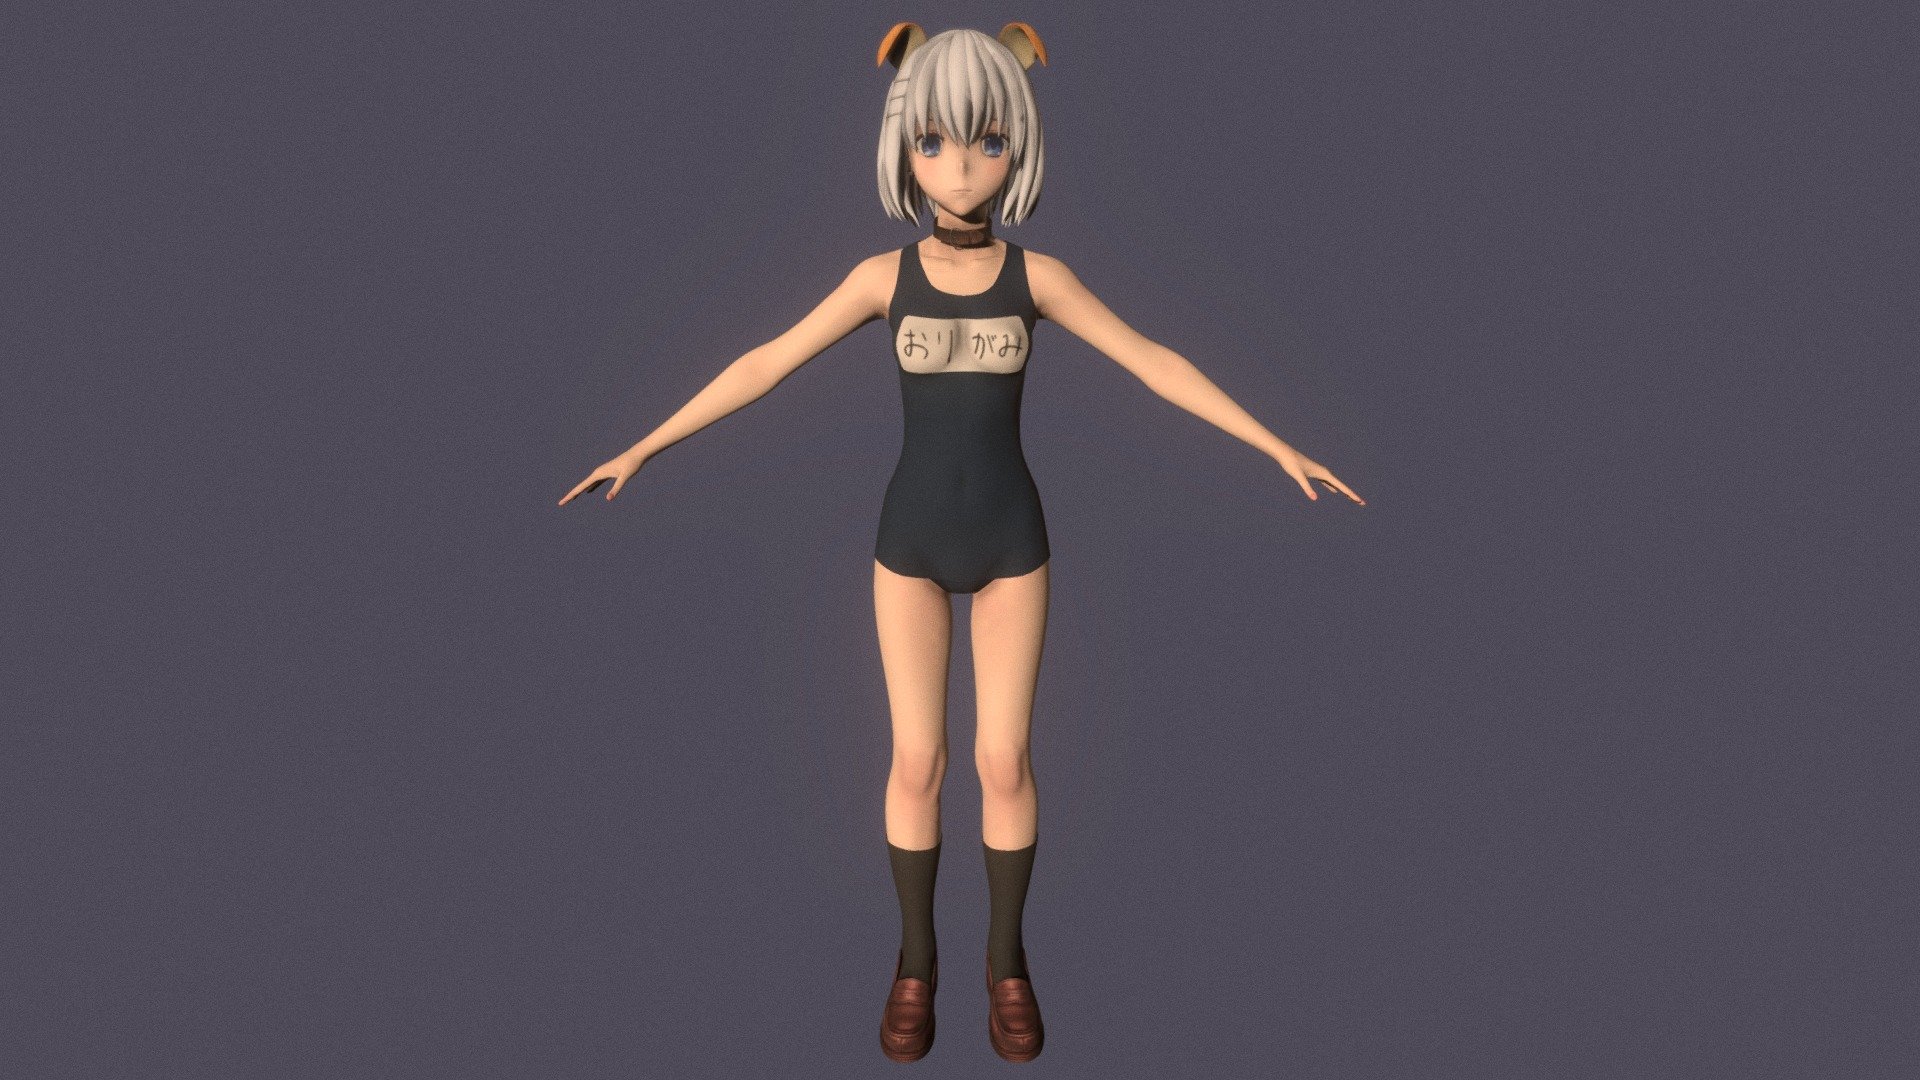 T-pose rigged model of anime girl Origami Tobiichi (Date A Live).

Body and clothings are rigged and skinned by 3ds Max CAT system.

Eye direction and facial animation controlled by Morpher modifier / Shape Keys / Blendshape.

This product include .FBX (ver. 7200) and .MAX (ver. 2010) files.

3ds Max version is turbosmoothed to give a high quality render (as you can see here).

Original main body mesh have ~7.000 polys.

This 3D model may need some tweaking to adapt the rig system to games engine and other platforms.

I support convert model to various file formats (the rig data will be lost in this process): 3DS; AI; ASE; DAE; DWF; DWG; DXF; FLT; HTR; IGS; M3G; MQO; OBJ; SAT; STL; W3D; WRL; X.

You can buy all of my models in one pack to save cost: https://sketchfab.com/3d-models/all-of-my-anime-girls-c5a56156994e4193b9e8fa21a3b8360b

And I can make commission models.

If you have any questions, please leave a comment or contact me via my email 3d.eden.project@gmail.com 3d model